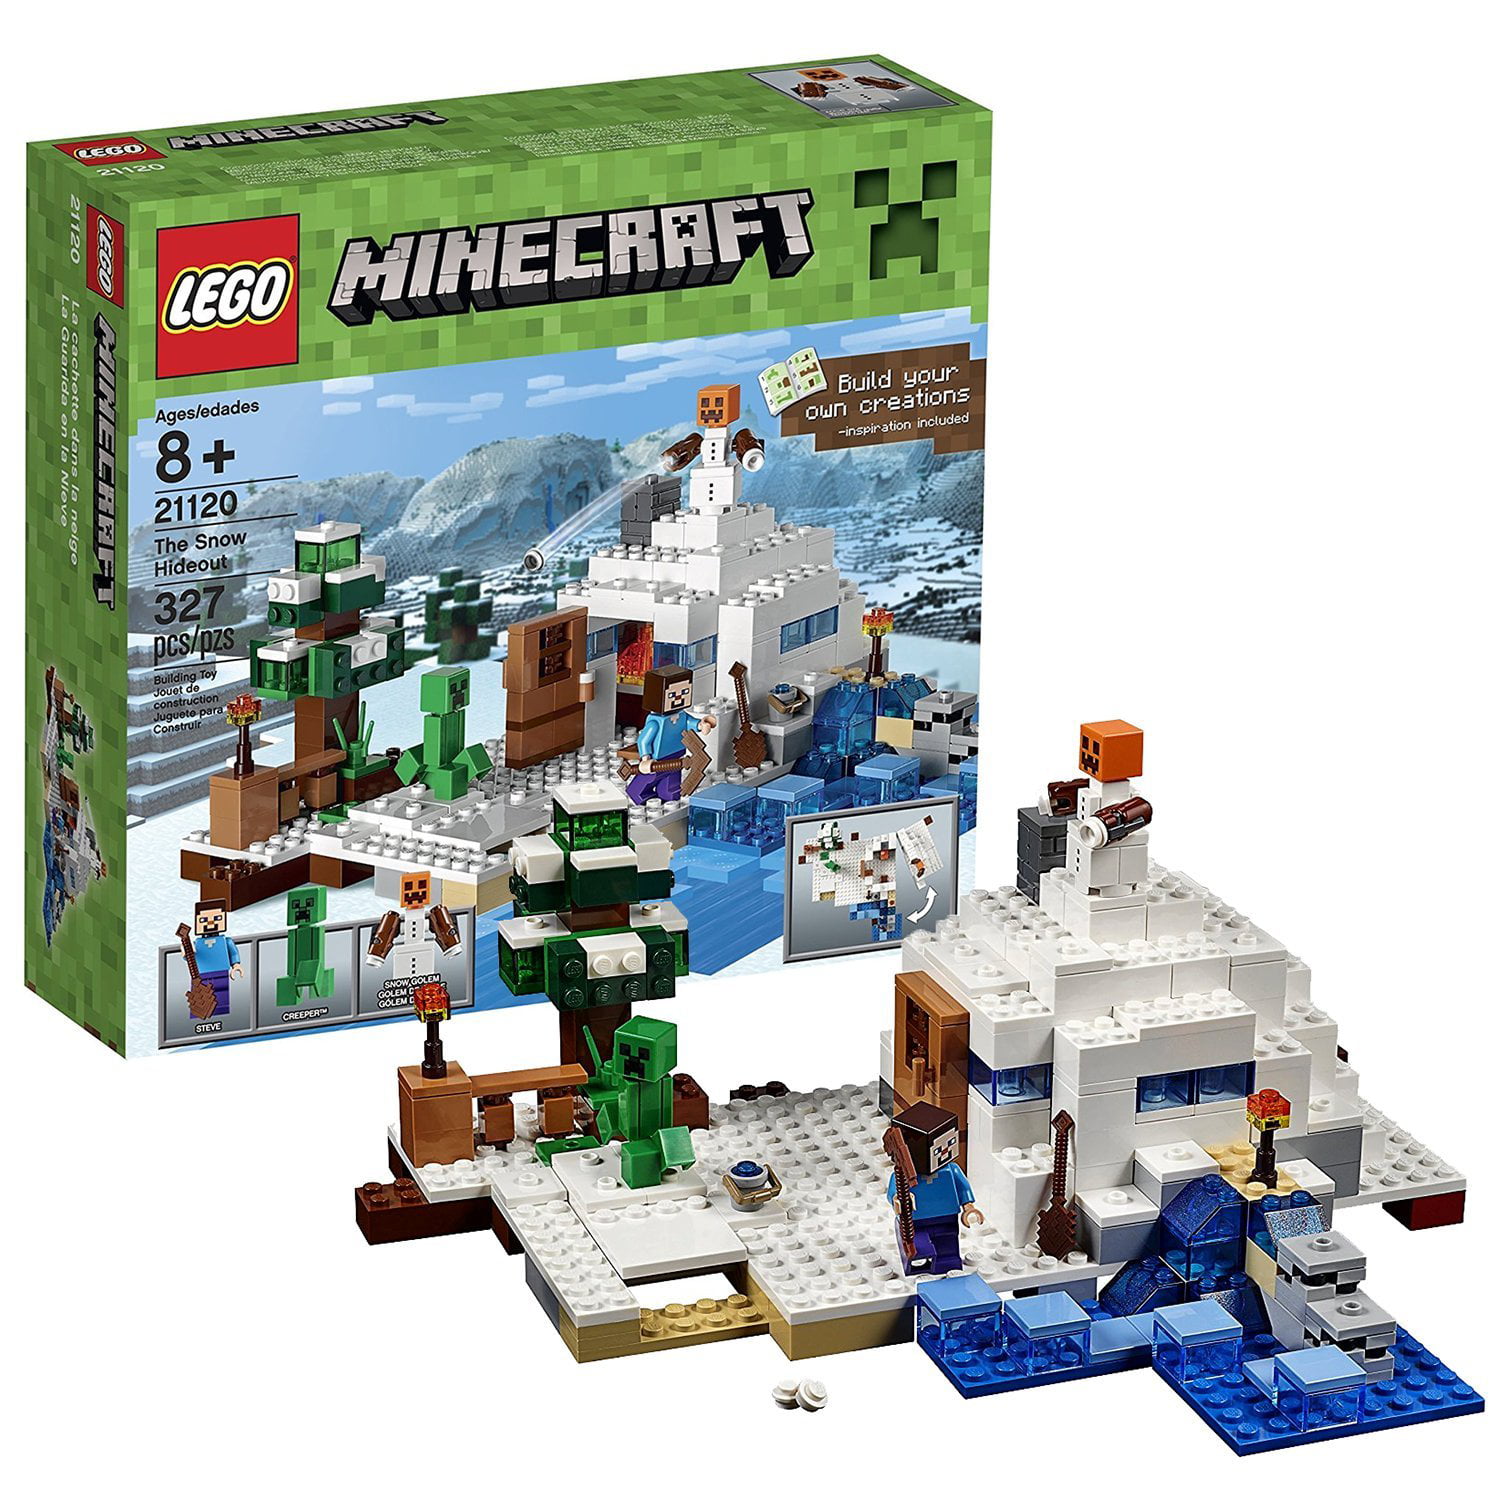 Every week gun Doctor Lego Year 2016 Minecraft Series Set #21120 - THE SNOW HIDEOUT with Creeper,  Snow Golem and Steve Minifigure (Pieces: 327) - Walmart.com